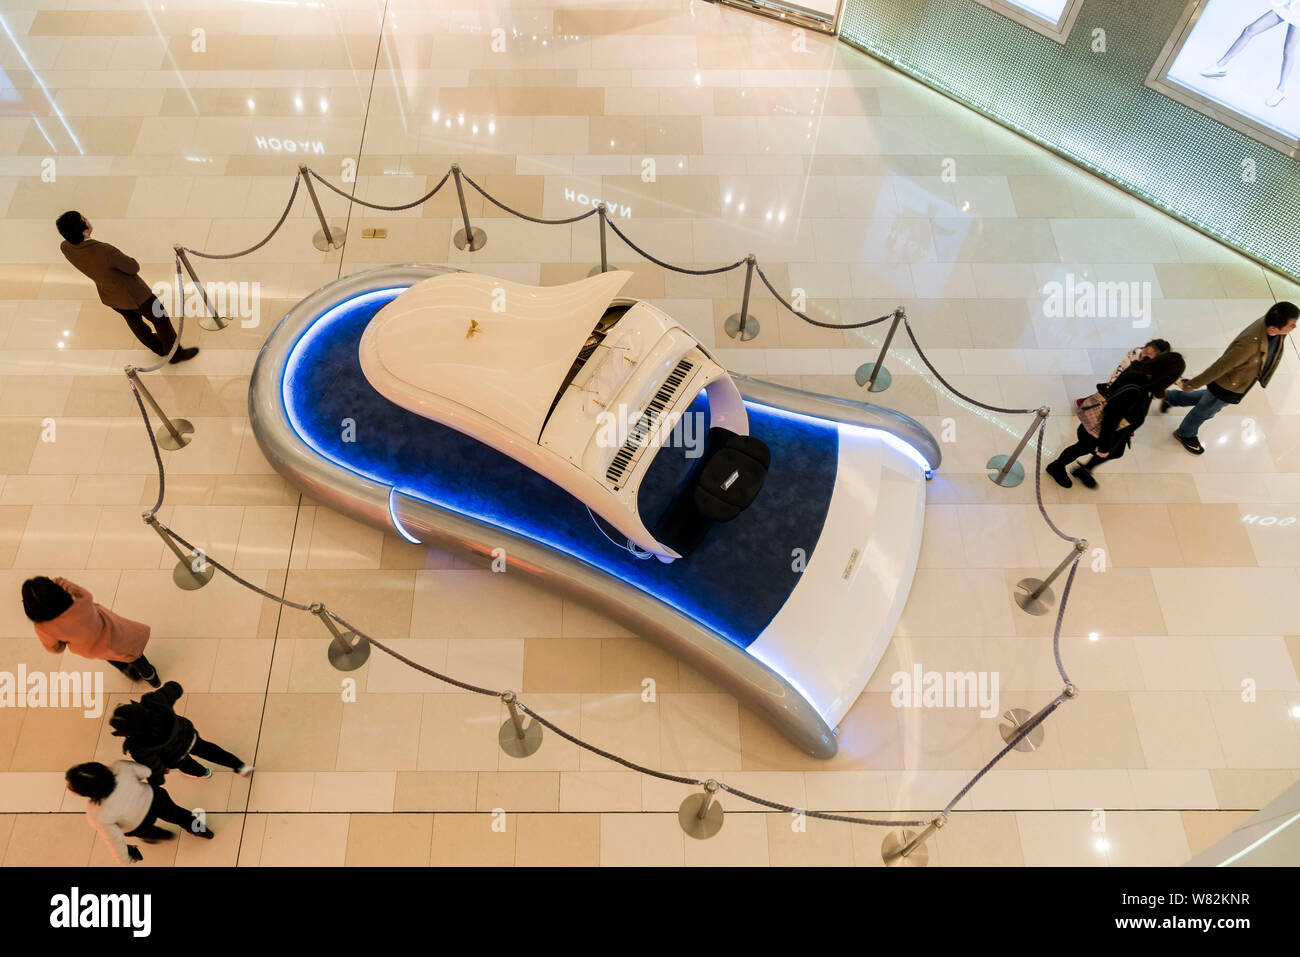 Aerial view of a Shimmel Pegasus piano on display at the atrium of a  shopping mall in Shanghai, China, 27 February 2017. A Shimmel Pegasus piano  was Stock Photo - Alamy